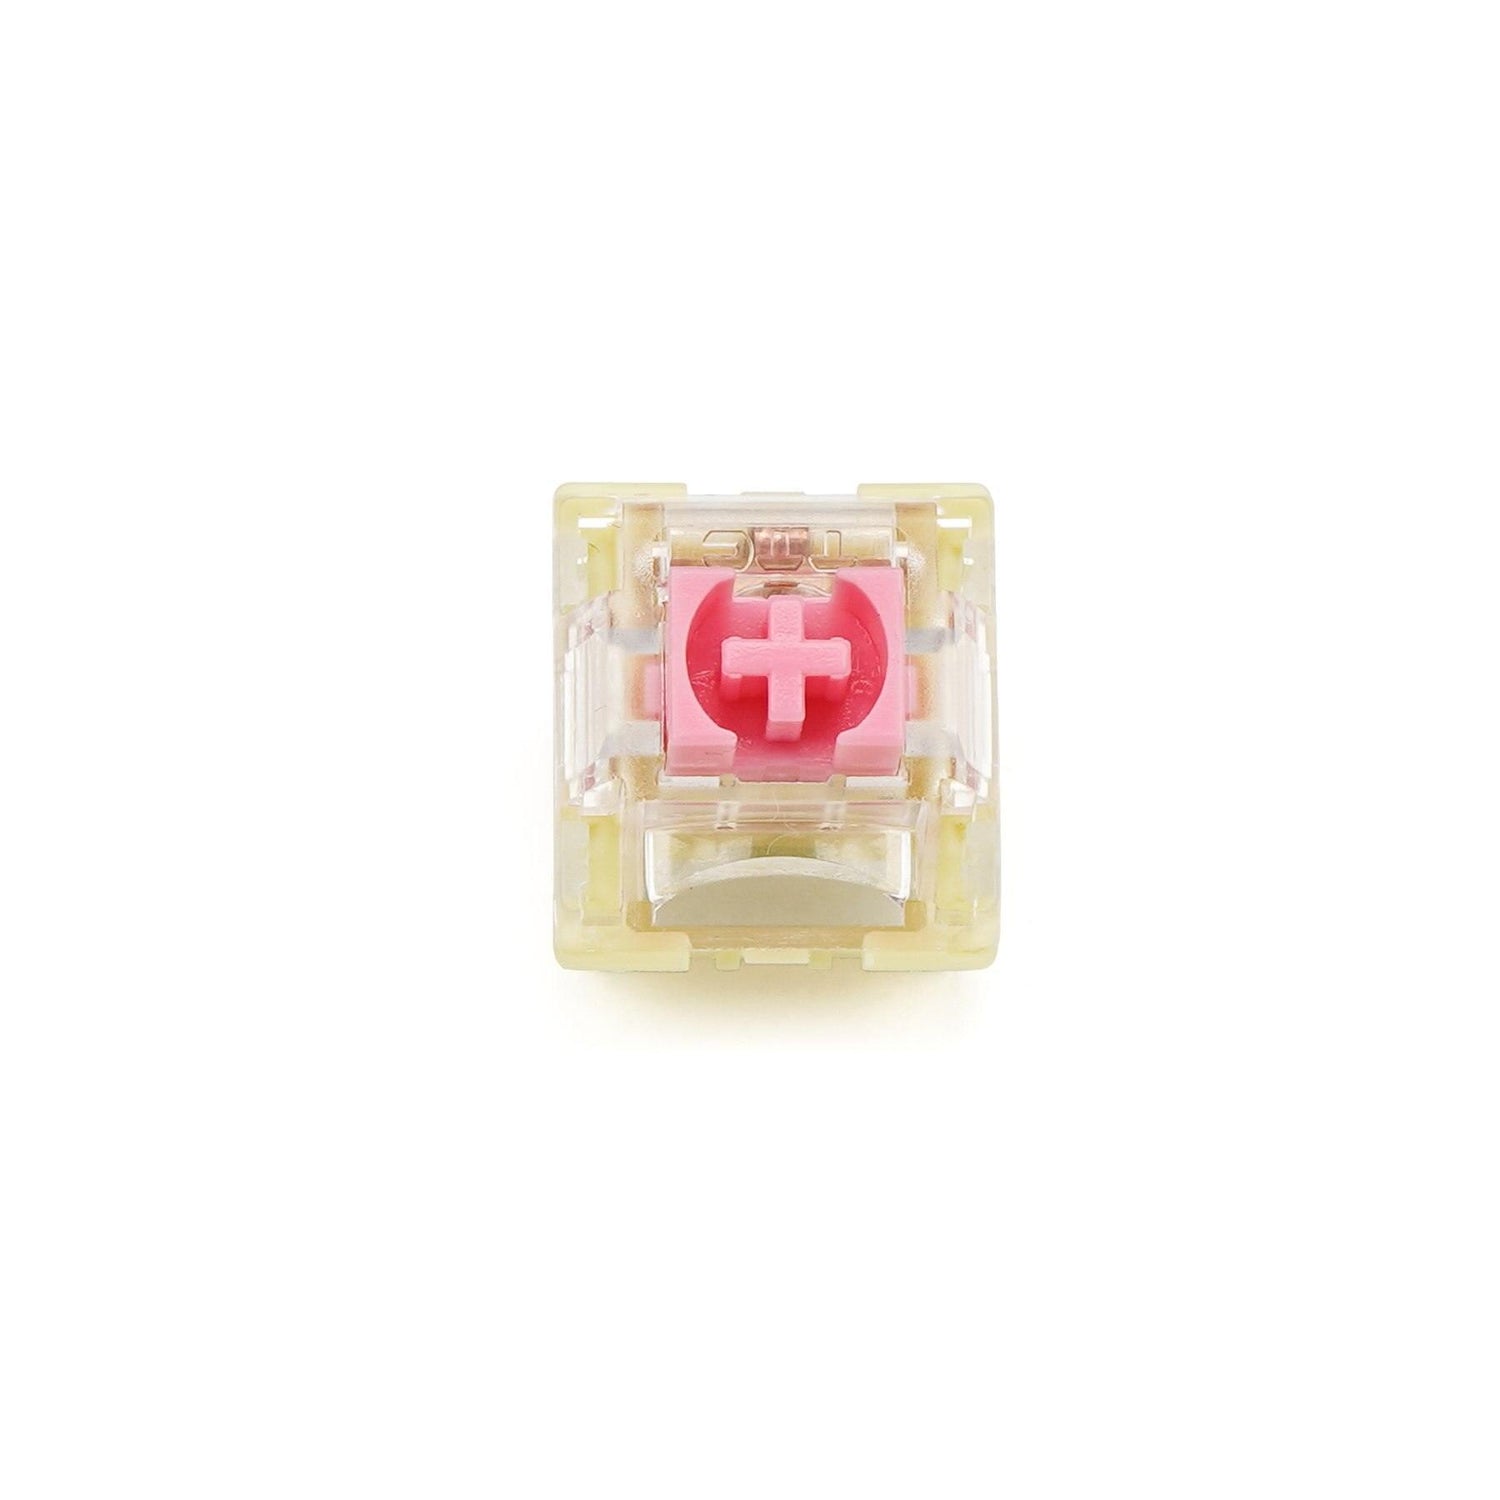 TTC GOLD PINK LINEAR SWITCHES - THE KEYCAP CLUB